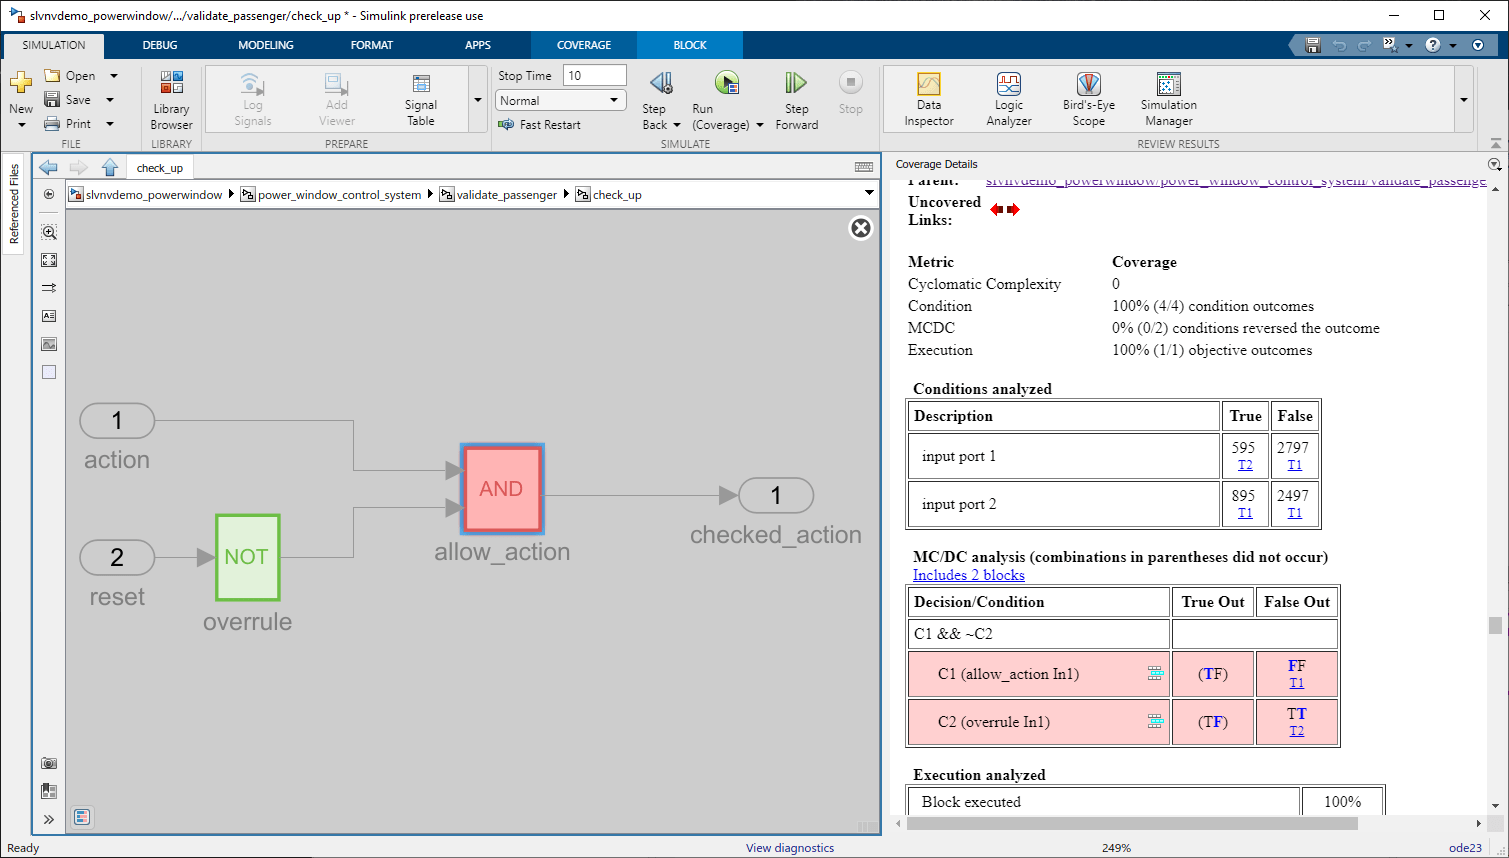 Simulink window after clicking the And block allow_action. The Coverage Details pane shows detailed coverage results for the block.